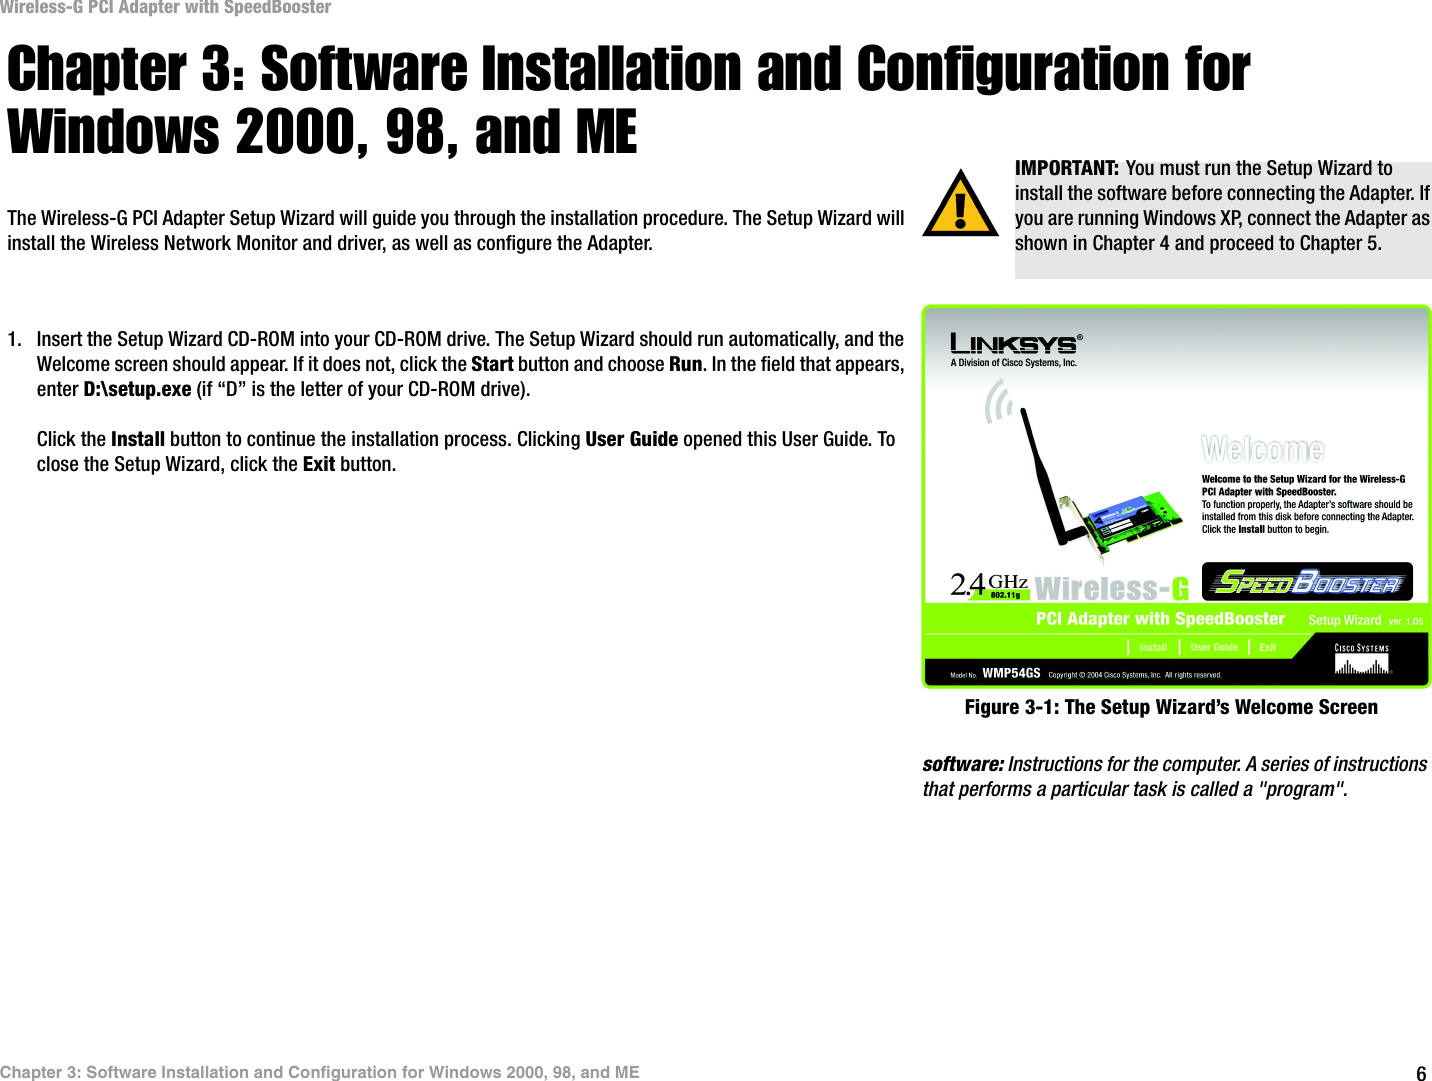 6Chapter 3: Software Installation and Configuration for Windows 2000, 98, and MEWireless-G PCI Adapter with SpeedBoosterChapter 3: Software Installation and Configuration for Windows 2000, 98, and METhe Wireless-G PCI Adapter Setup Wizard will guide you through the installation procedure. The Setup Wizard will install the Wireless Network Monitor and driver, as well as configure the Adapter.1. Insert the Setup Wizard CD-ROM into your CD-ROM drive. The Setup Wizard should run automatically, and the Welcome screen should appear. If it does not, click the Start button and choose Run. In the field that appears, enter D:\setup.exe (if “D” is the letter of your CD-ROM drive).Click the Install button to continue the installation process. Clicking User Guide opened this User Guide. To close the Setup Wizard, click the Exit button. IMPORTANT: You must run the Setup Wizard to install the software before connecting the Adapter. If you are running Windows XP, connect the Adapter as shown in Chapter 4 and proceed to Chapter 5.Figure 3-1: The Setup Wizard’s Welcome Screensoftware: Instructions for the computer. A series of instructions that performs a particular task is called a &quot;program&quot;.